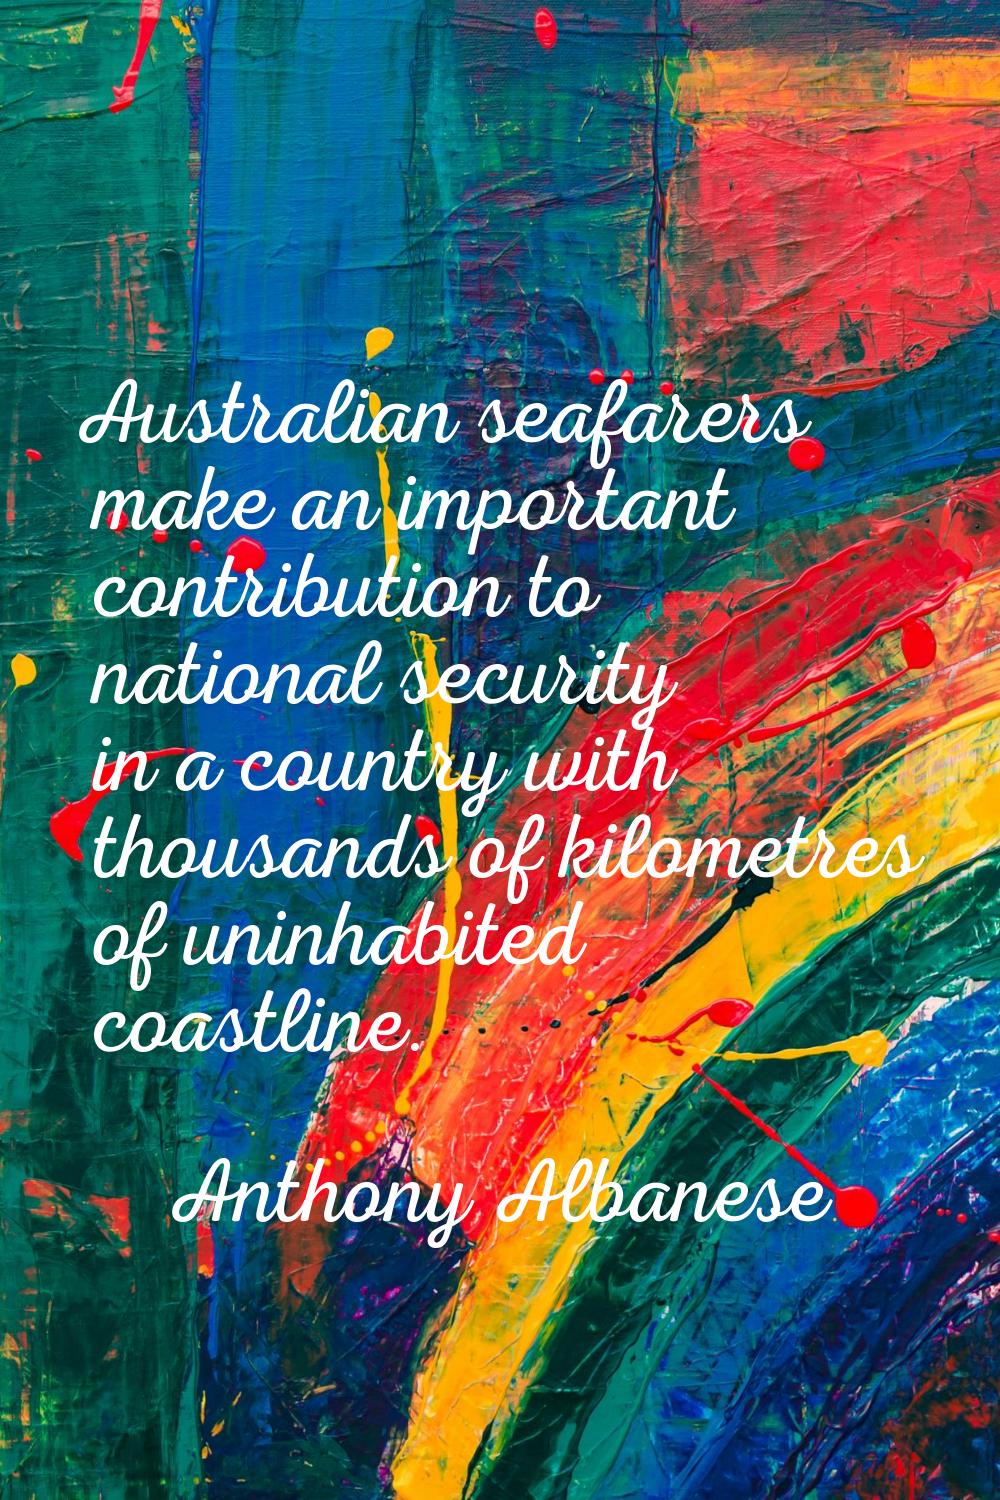 Australian seafarers make an important contribution to national security in a country with thousand